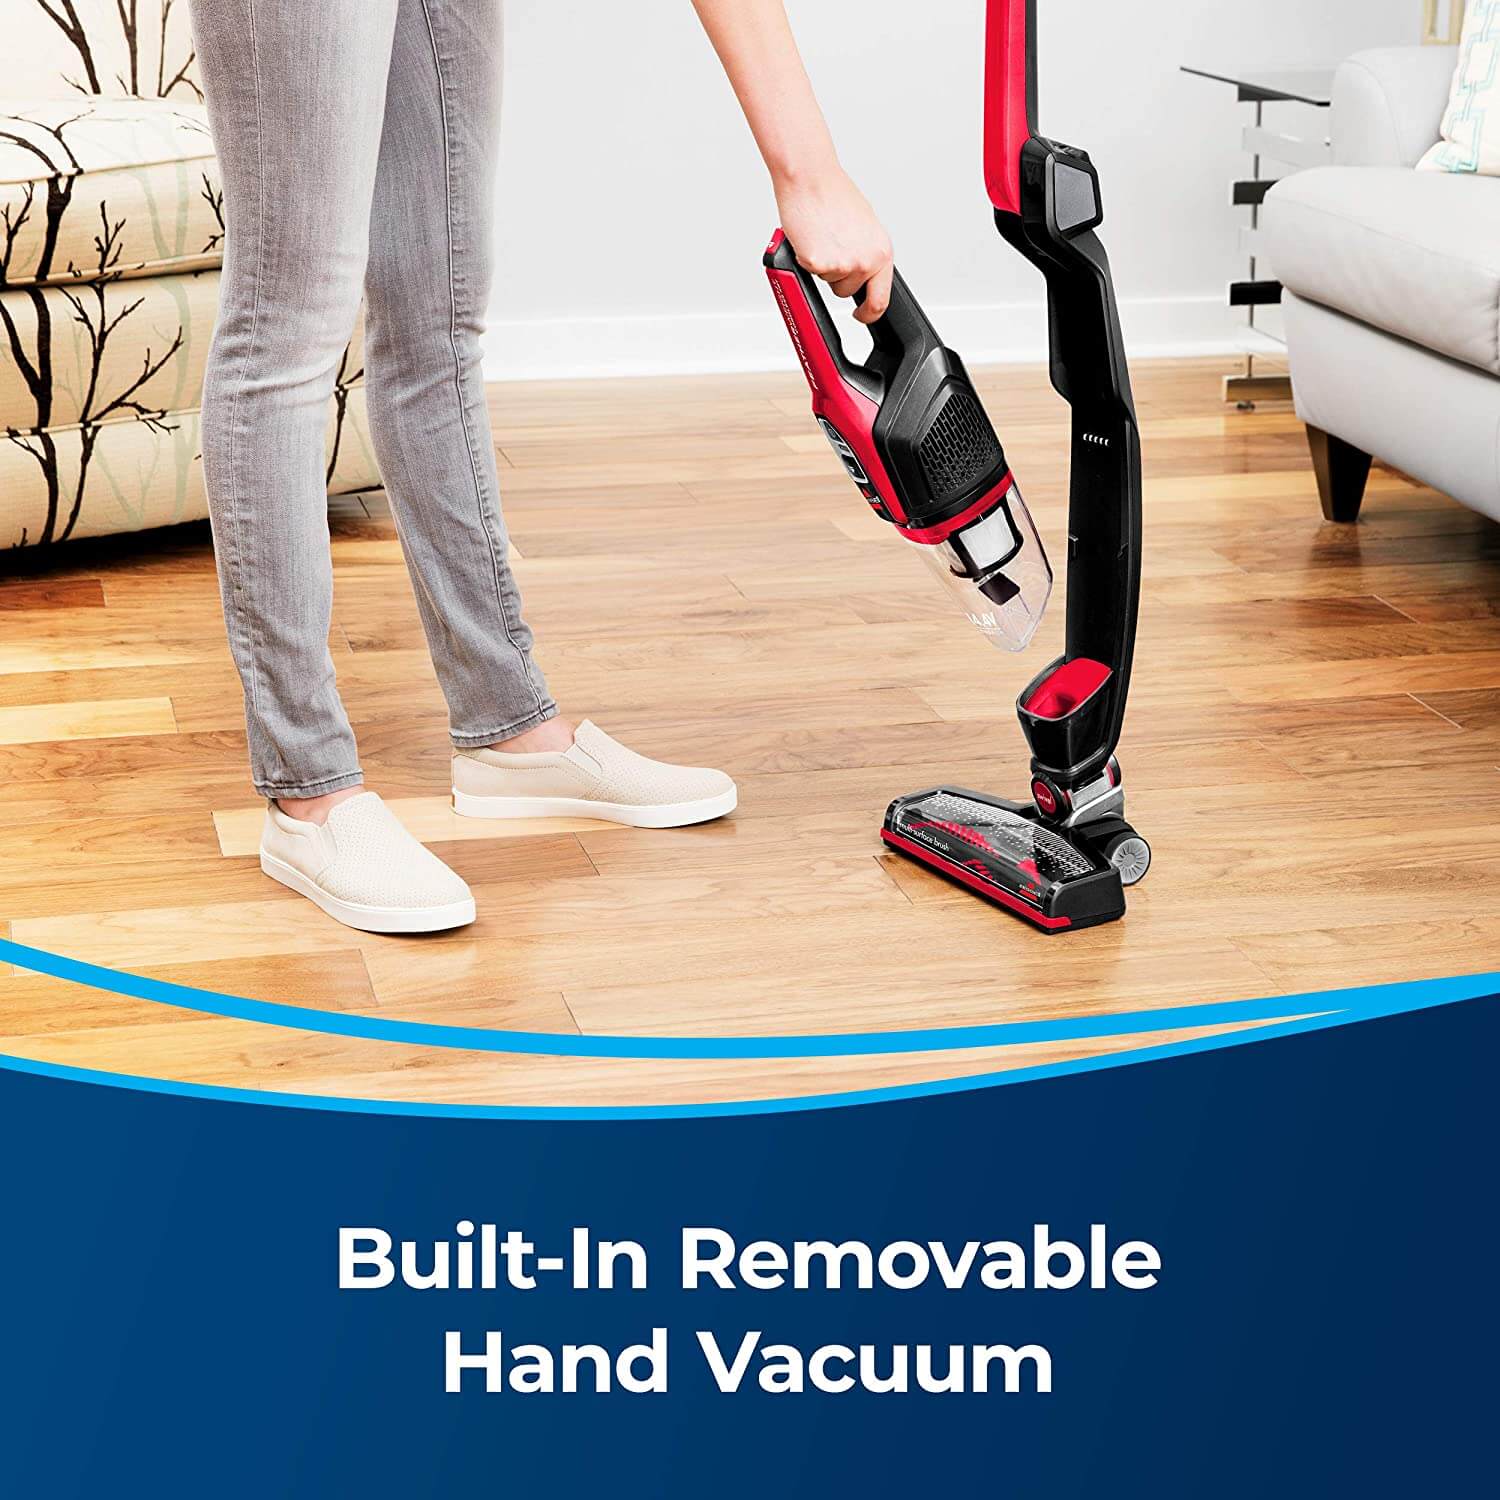 How to Clean Vacuum Cleaner – The Ultimate Guide 2022